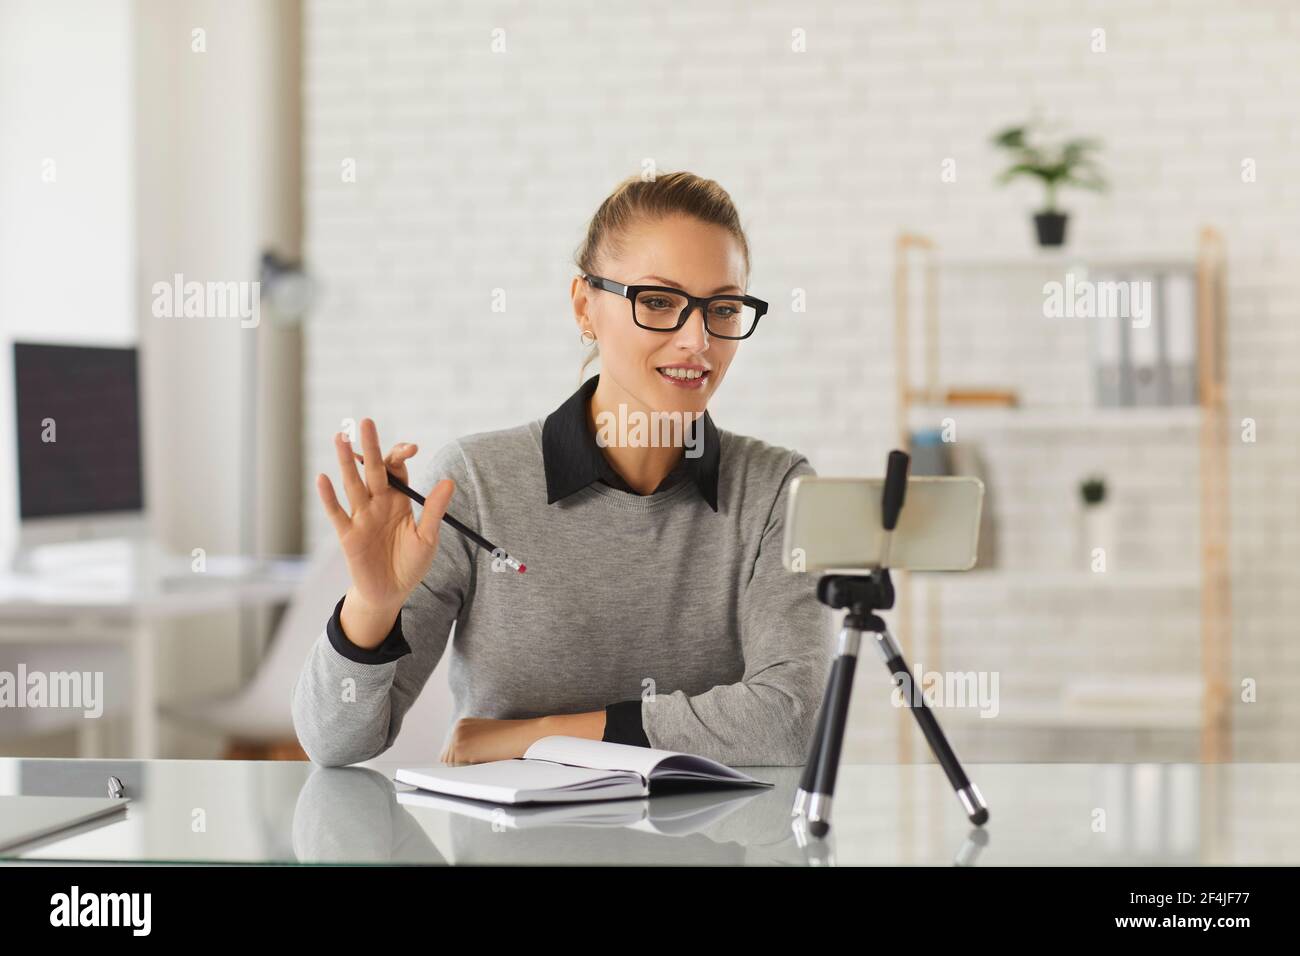 Remote teacher or business coach saying hello to her students in a virtual lesson Stock Photo